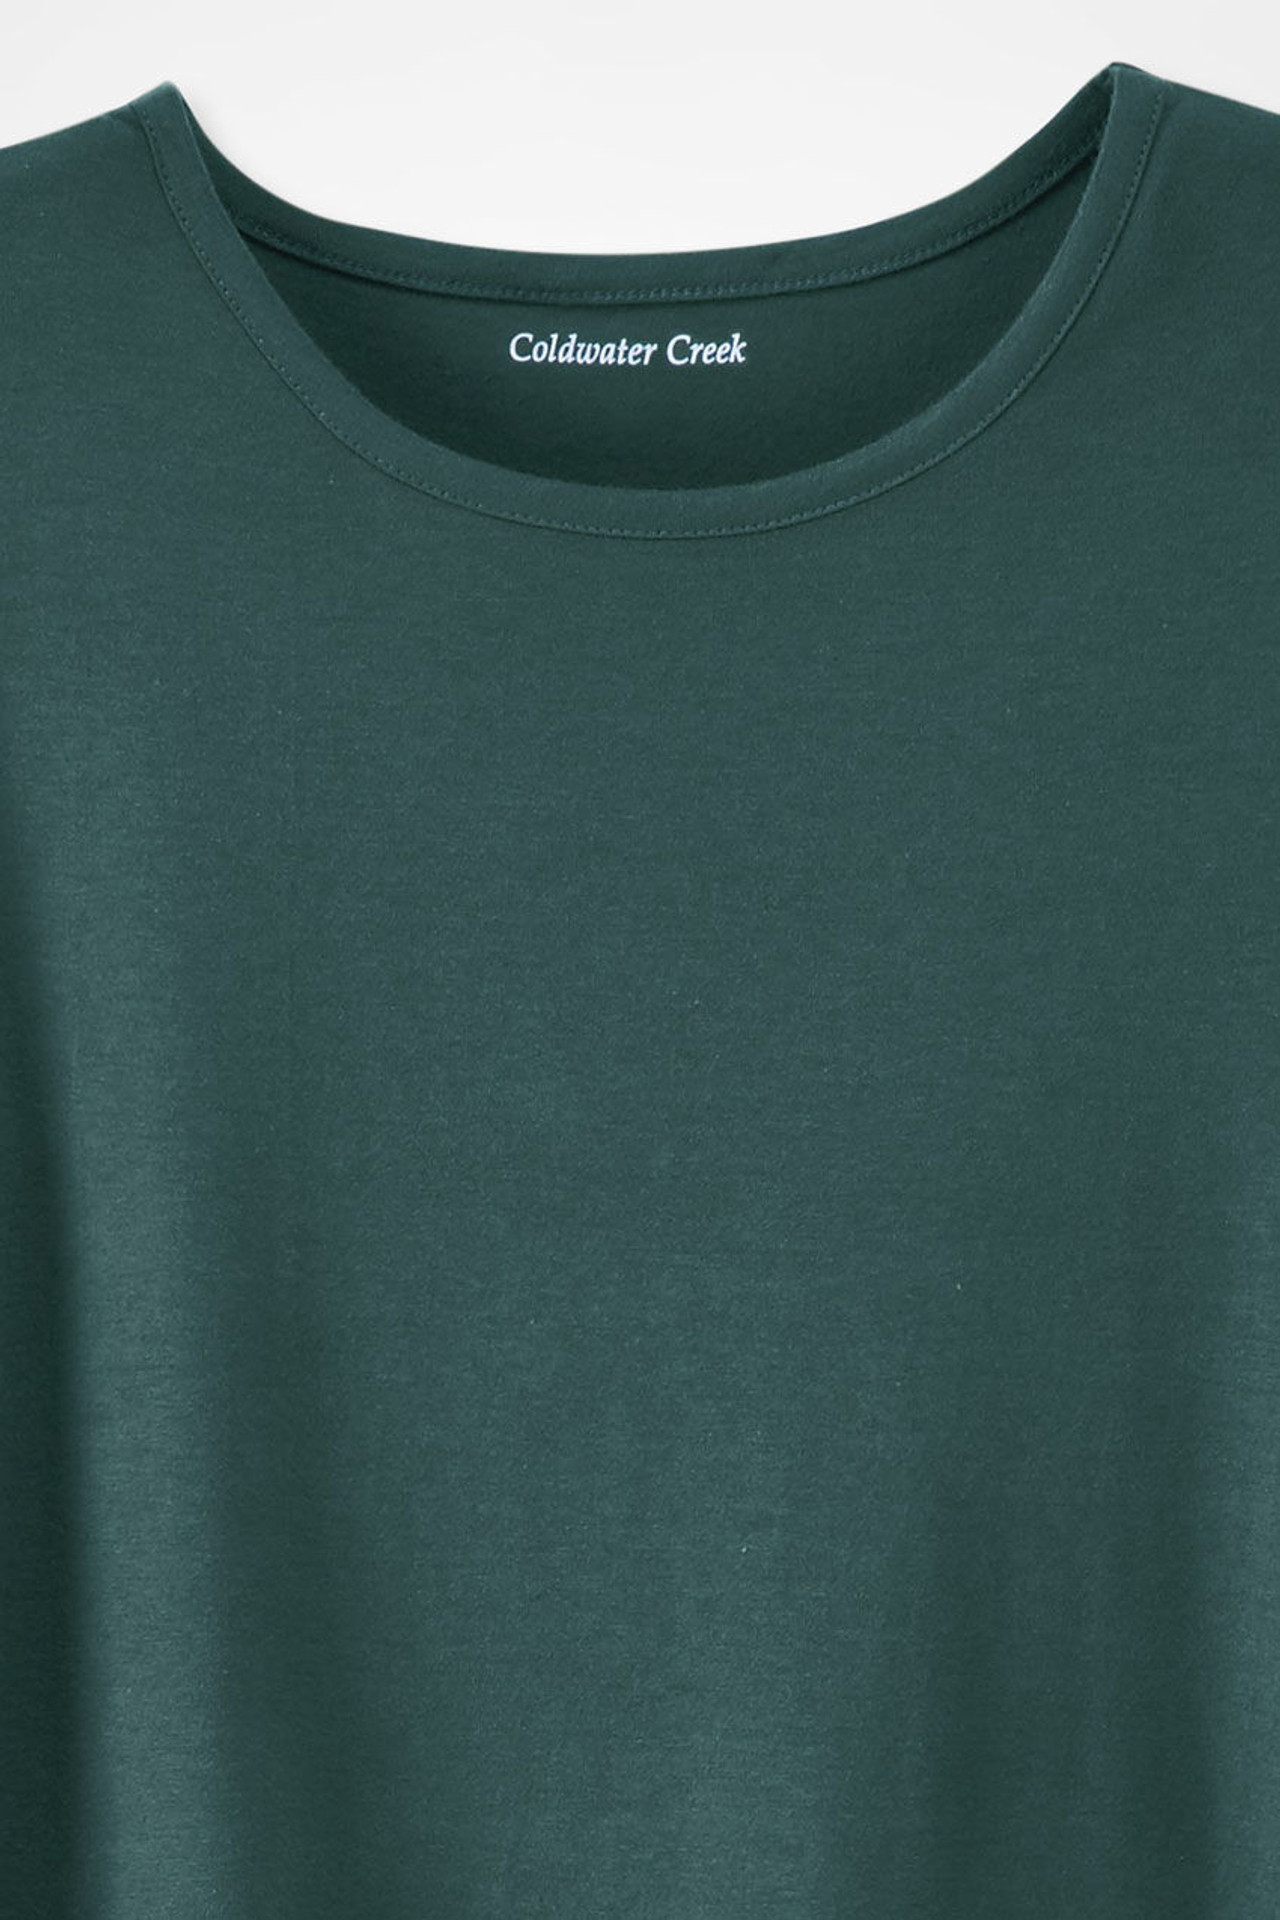 PrimaKnit? Crewneck Tee - Coldwater Creek Outlets